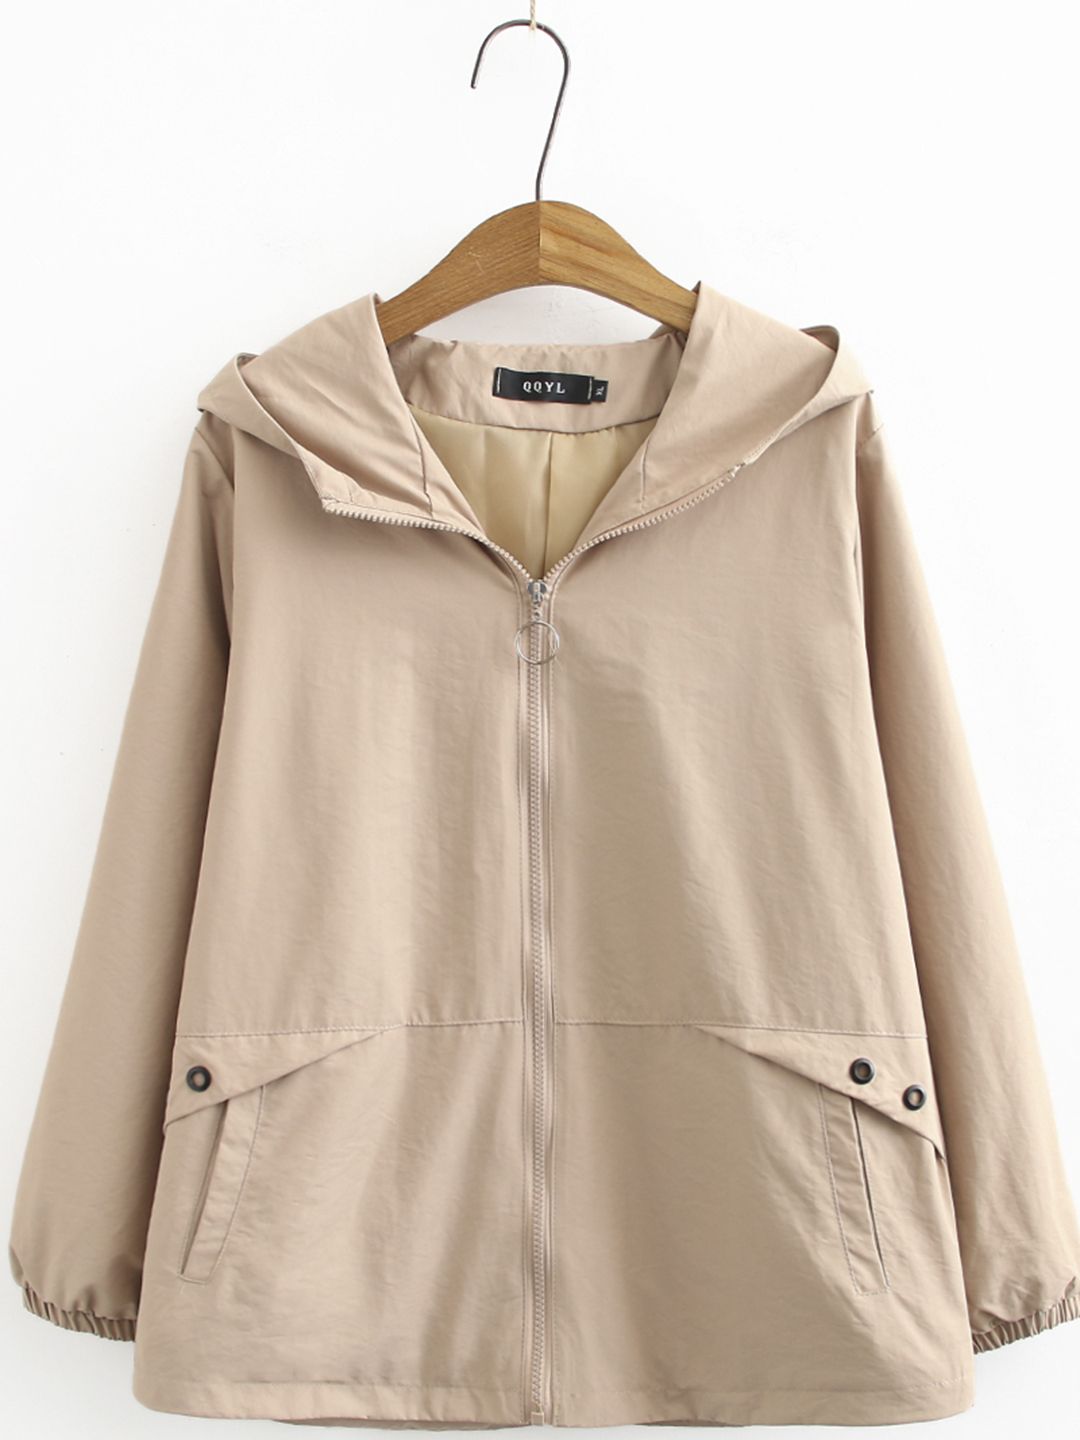 URBANIC Women Plus Size Beige Solid Hooded Tailored Jacket Price in India